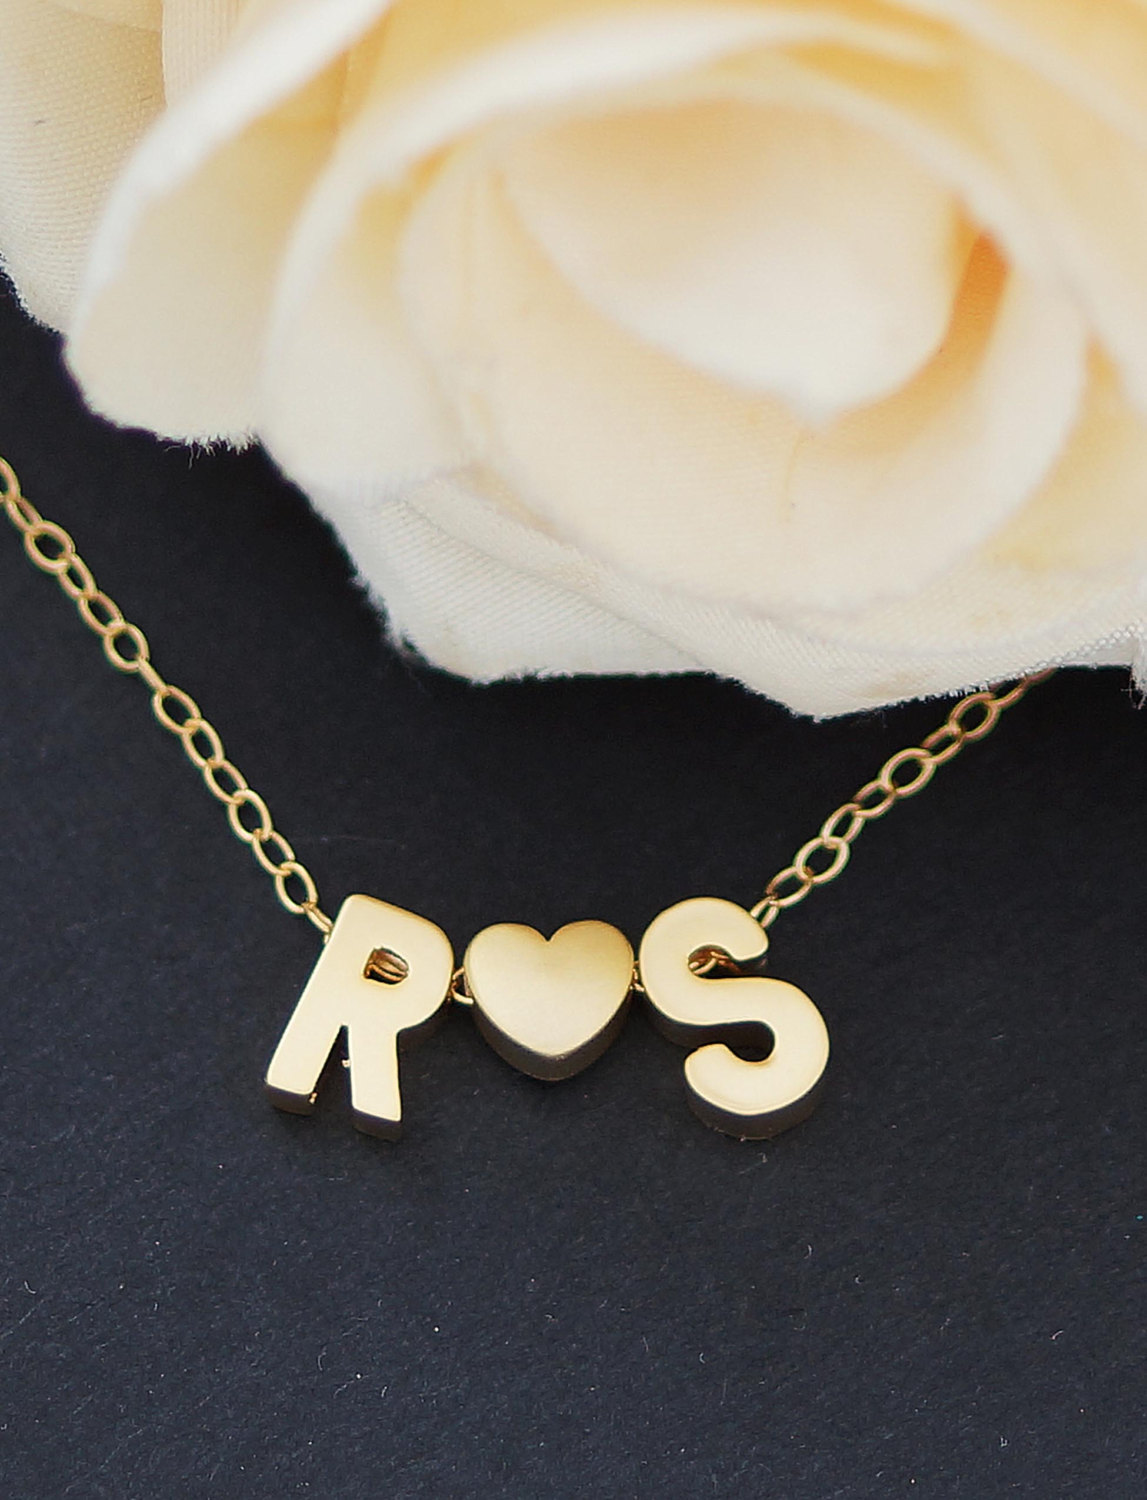 Two Tiny Gold Initials With Gold Heart Necklace Gold Filled Chain Personalized Necklace Bridesmaids Gift Weddings Christmas Gift